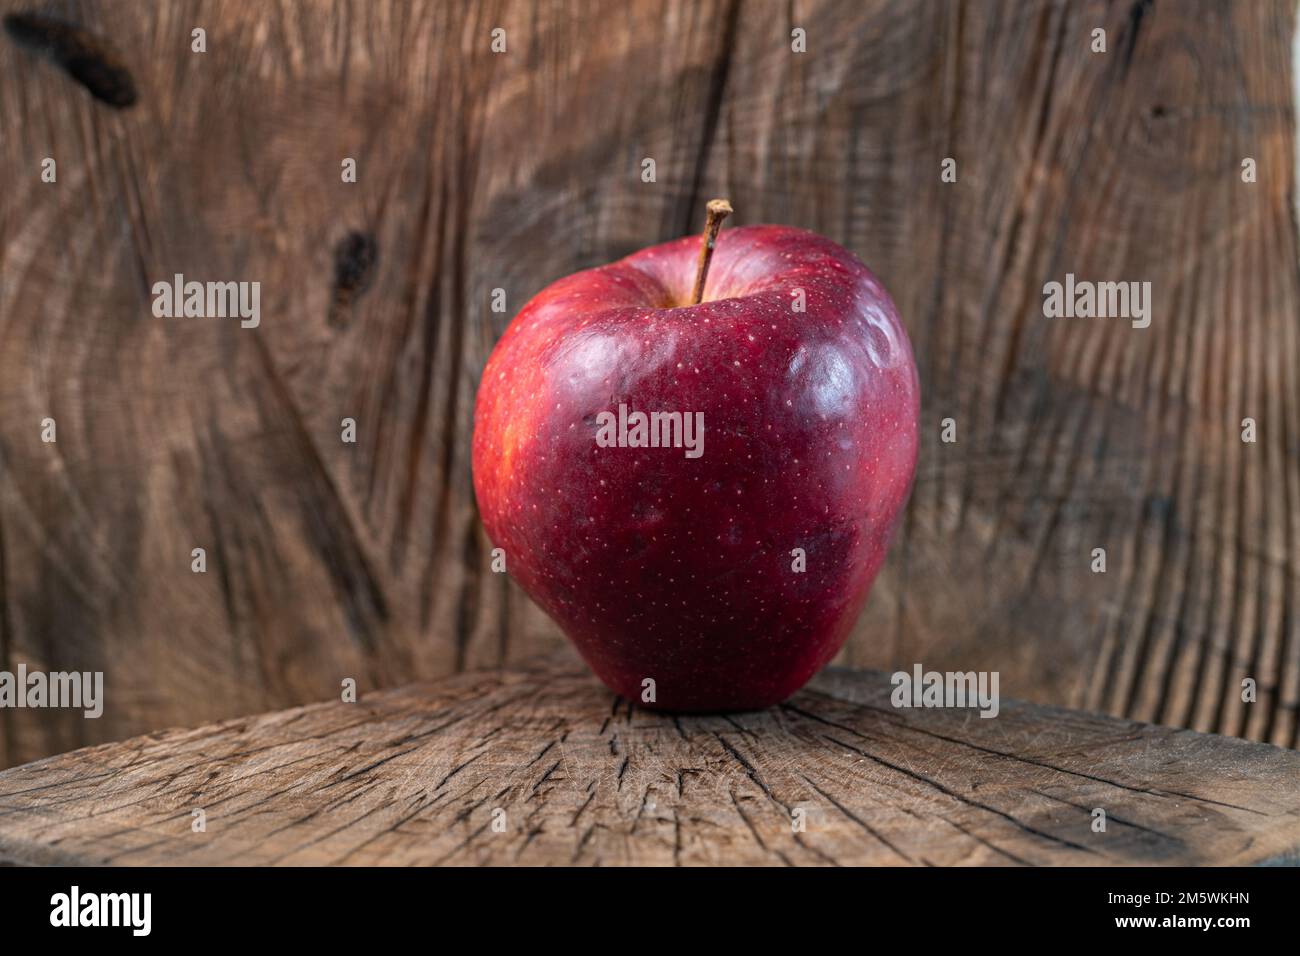 An evocative image of a bright red apple set against a rustic wooden backdrop, capturing the essence of freshness and authentic nature Stock Photo